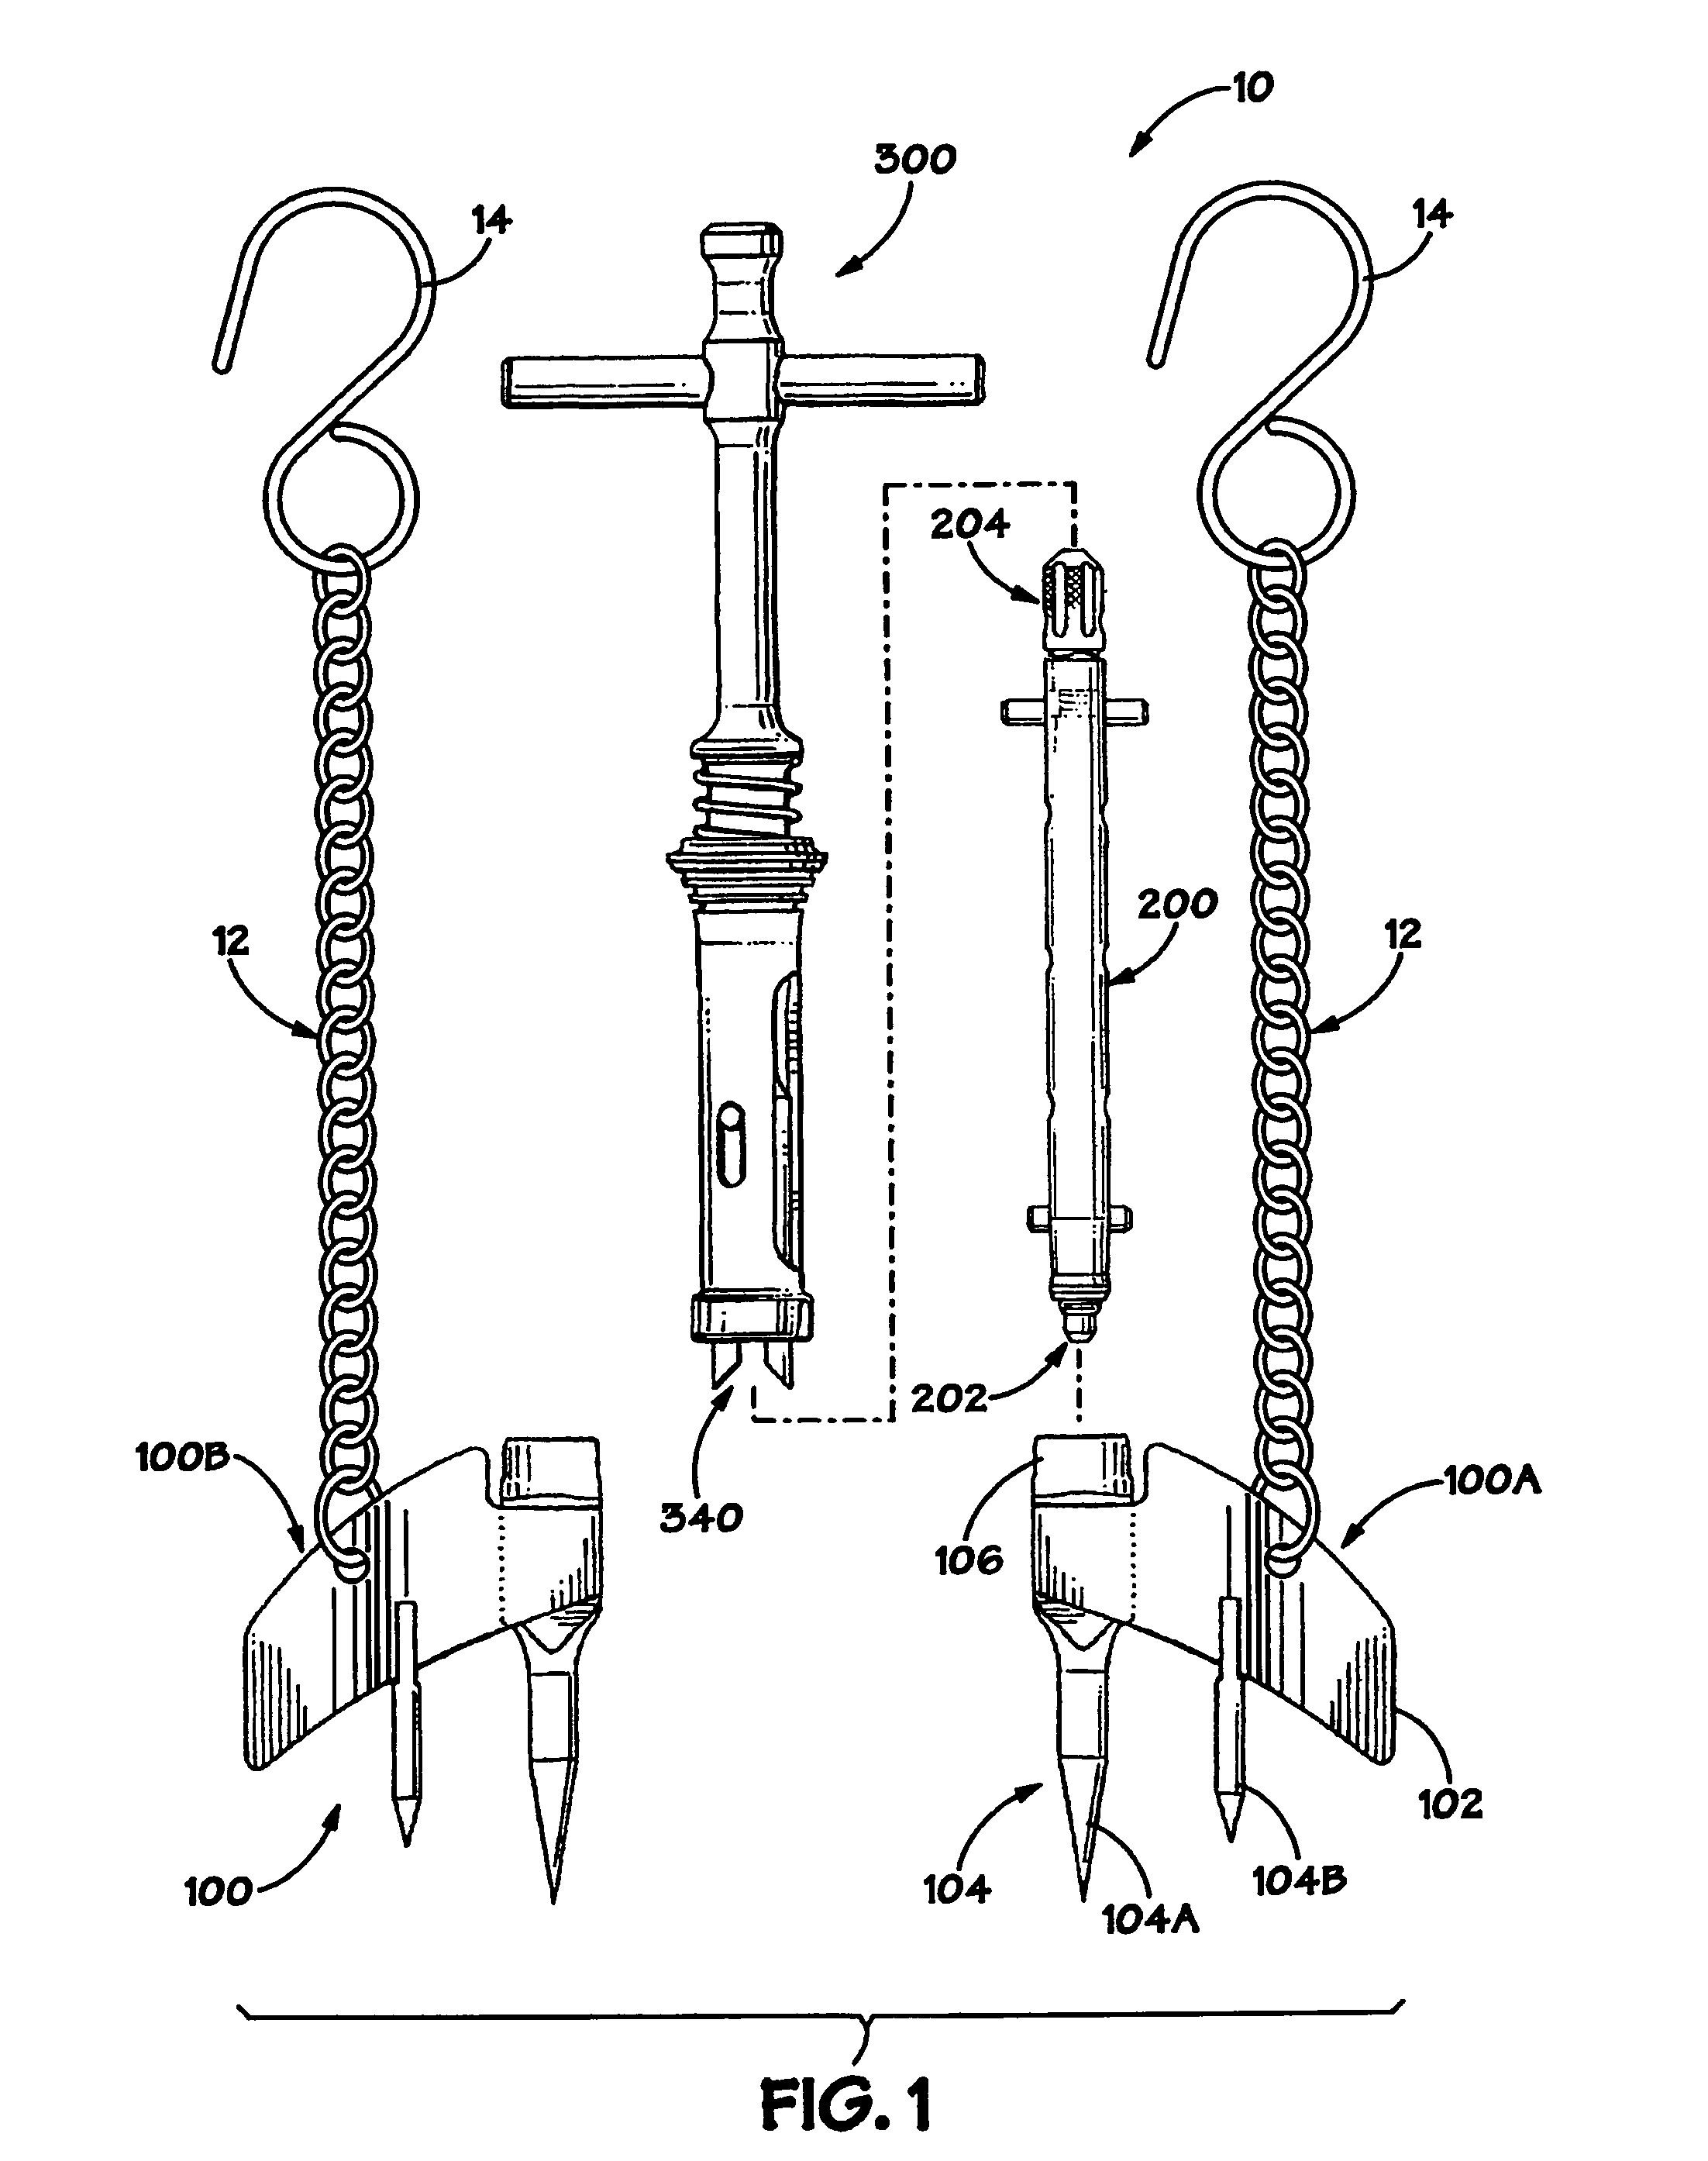 Retractor instrumentation for total hip arthroplasty, and methods of using same